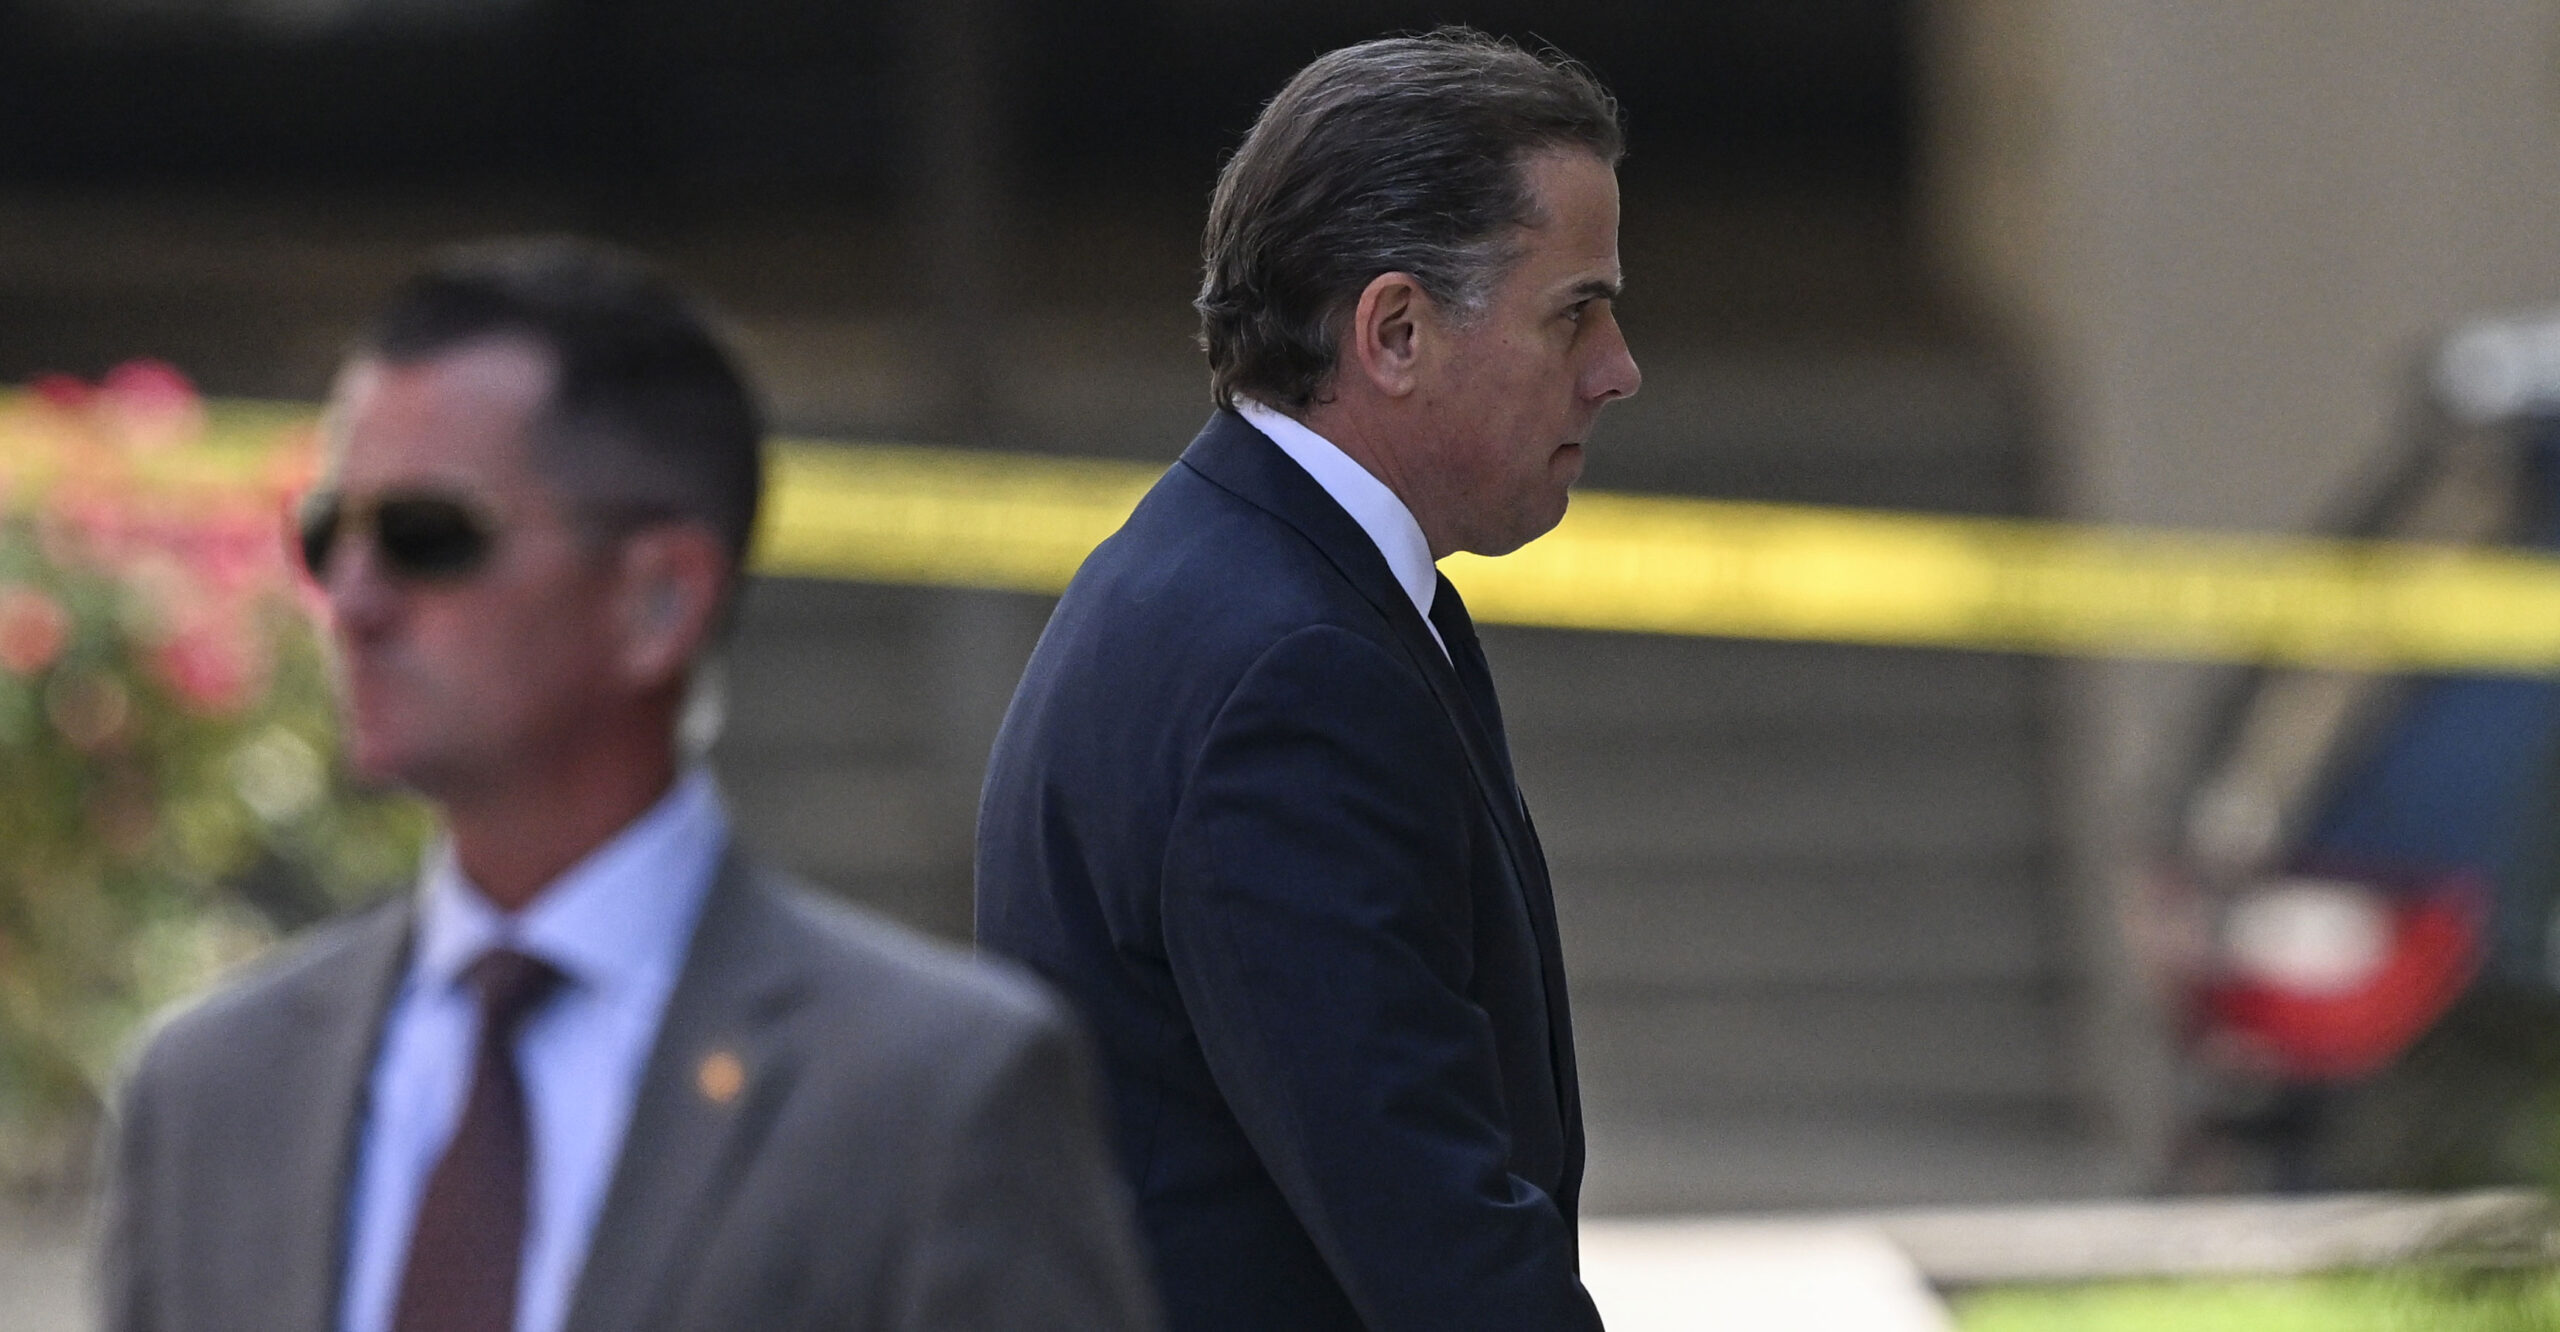 Hunter Biden Plea Deal Collapses, Trial Increasingly Likely